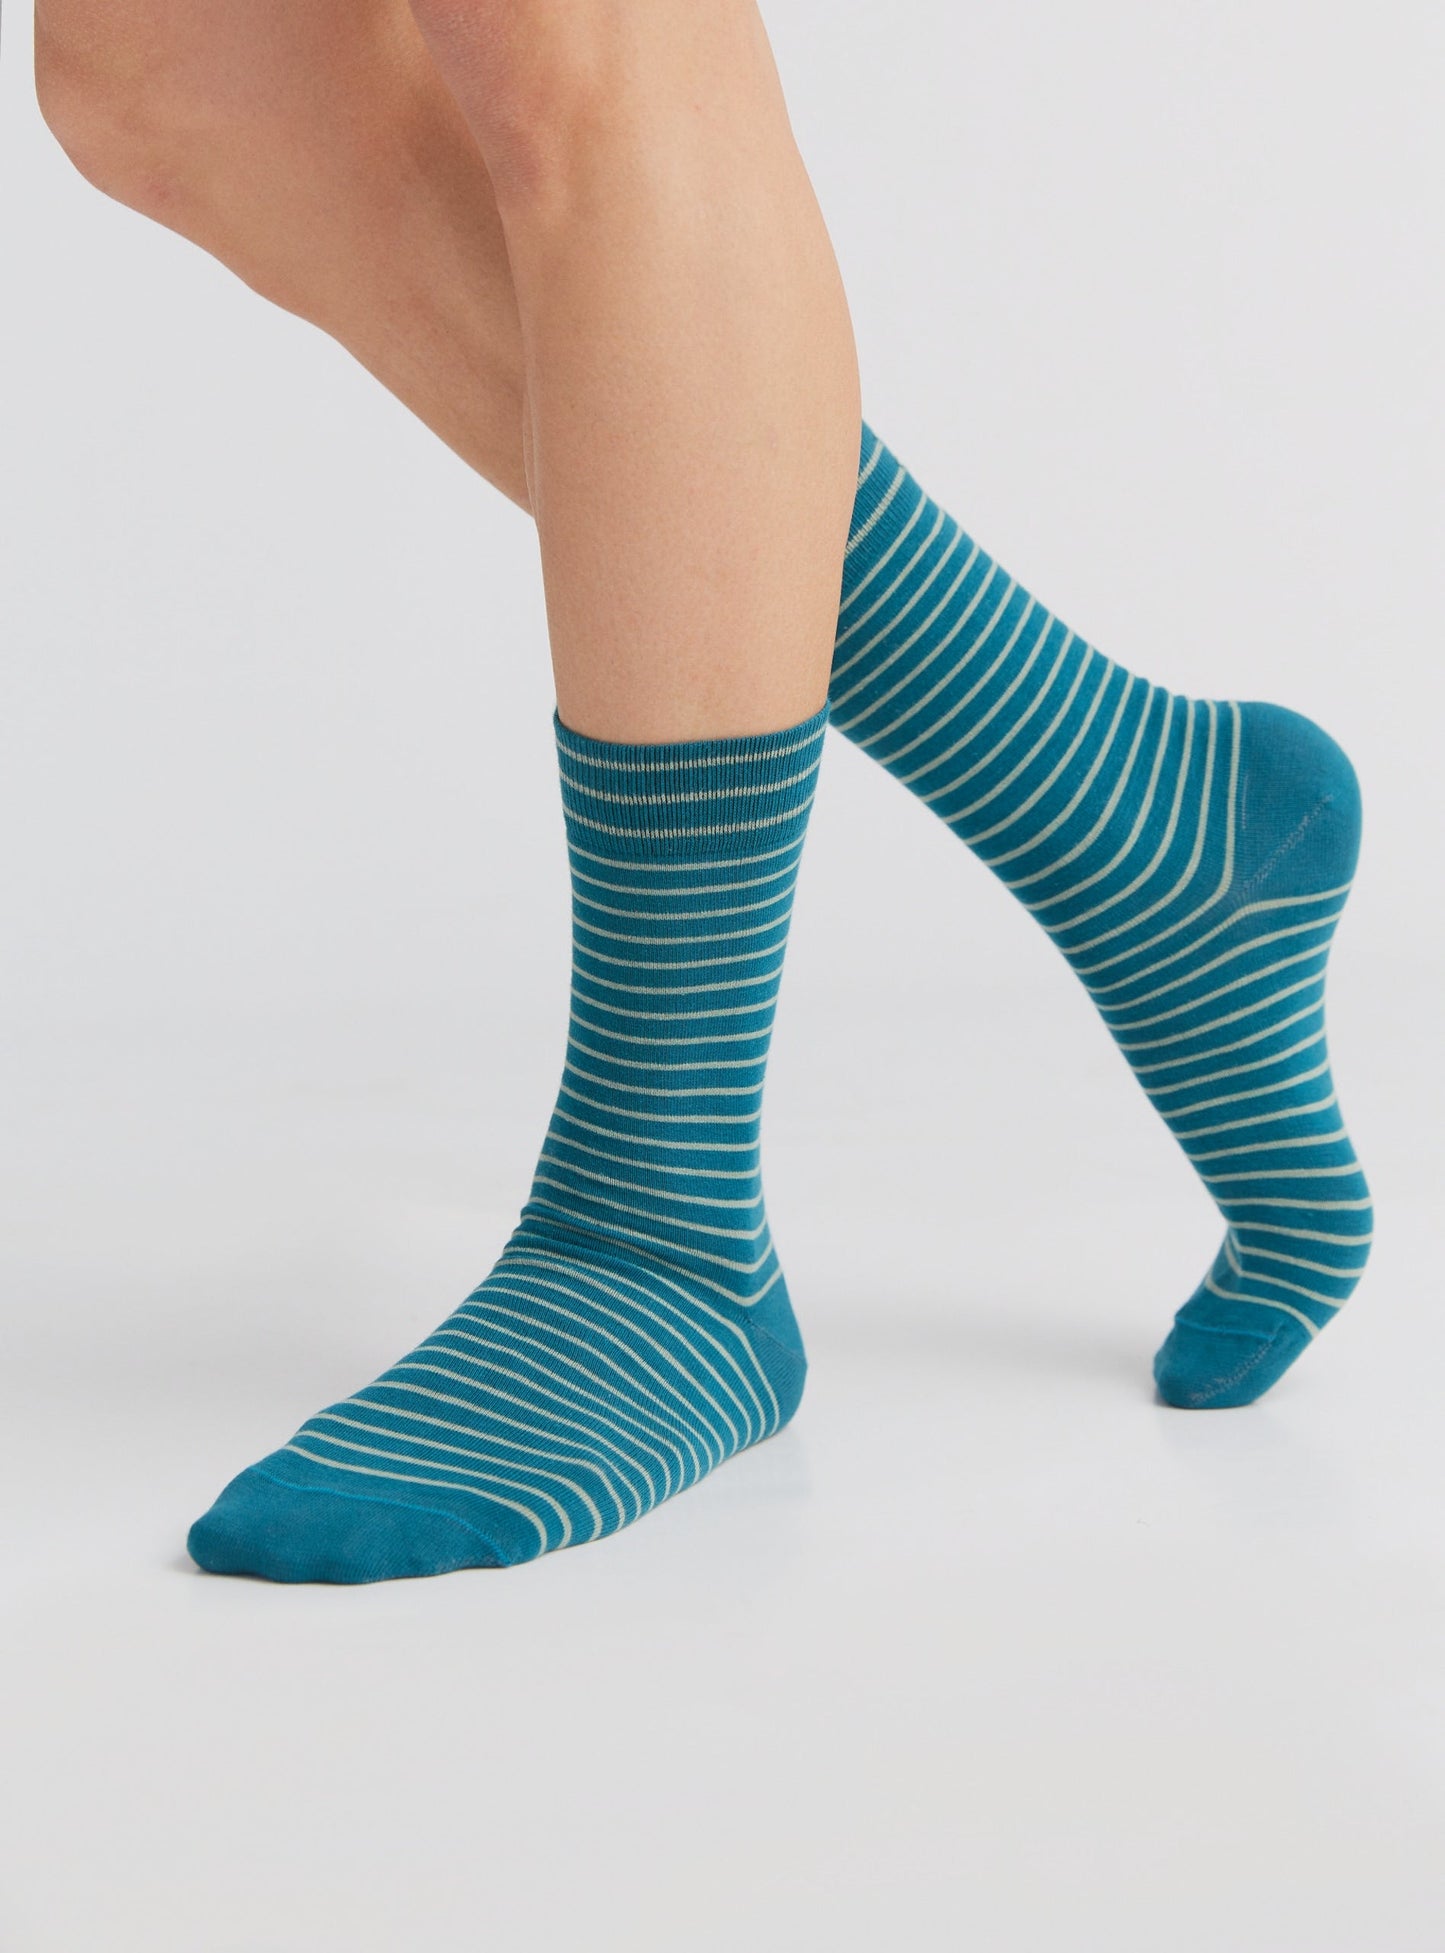 2310 | Stockings teal/frost green